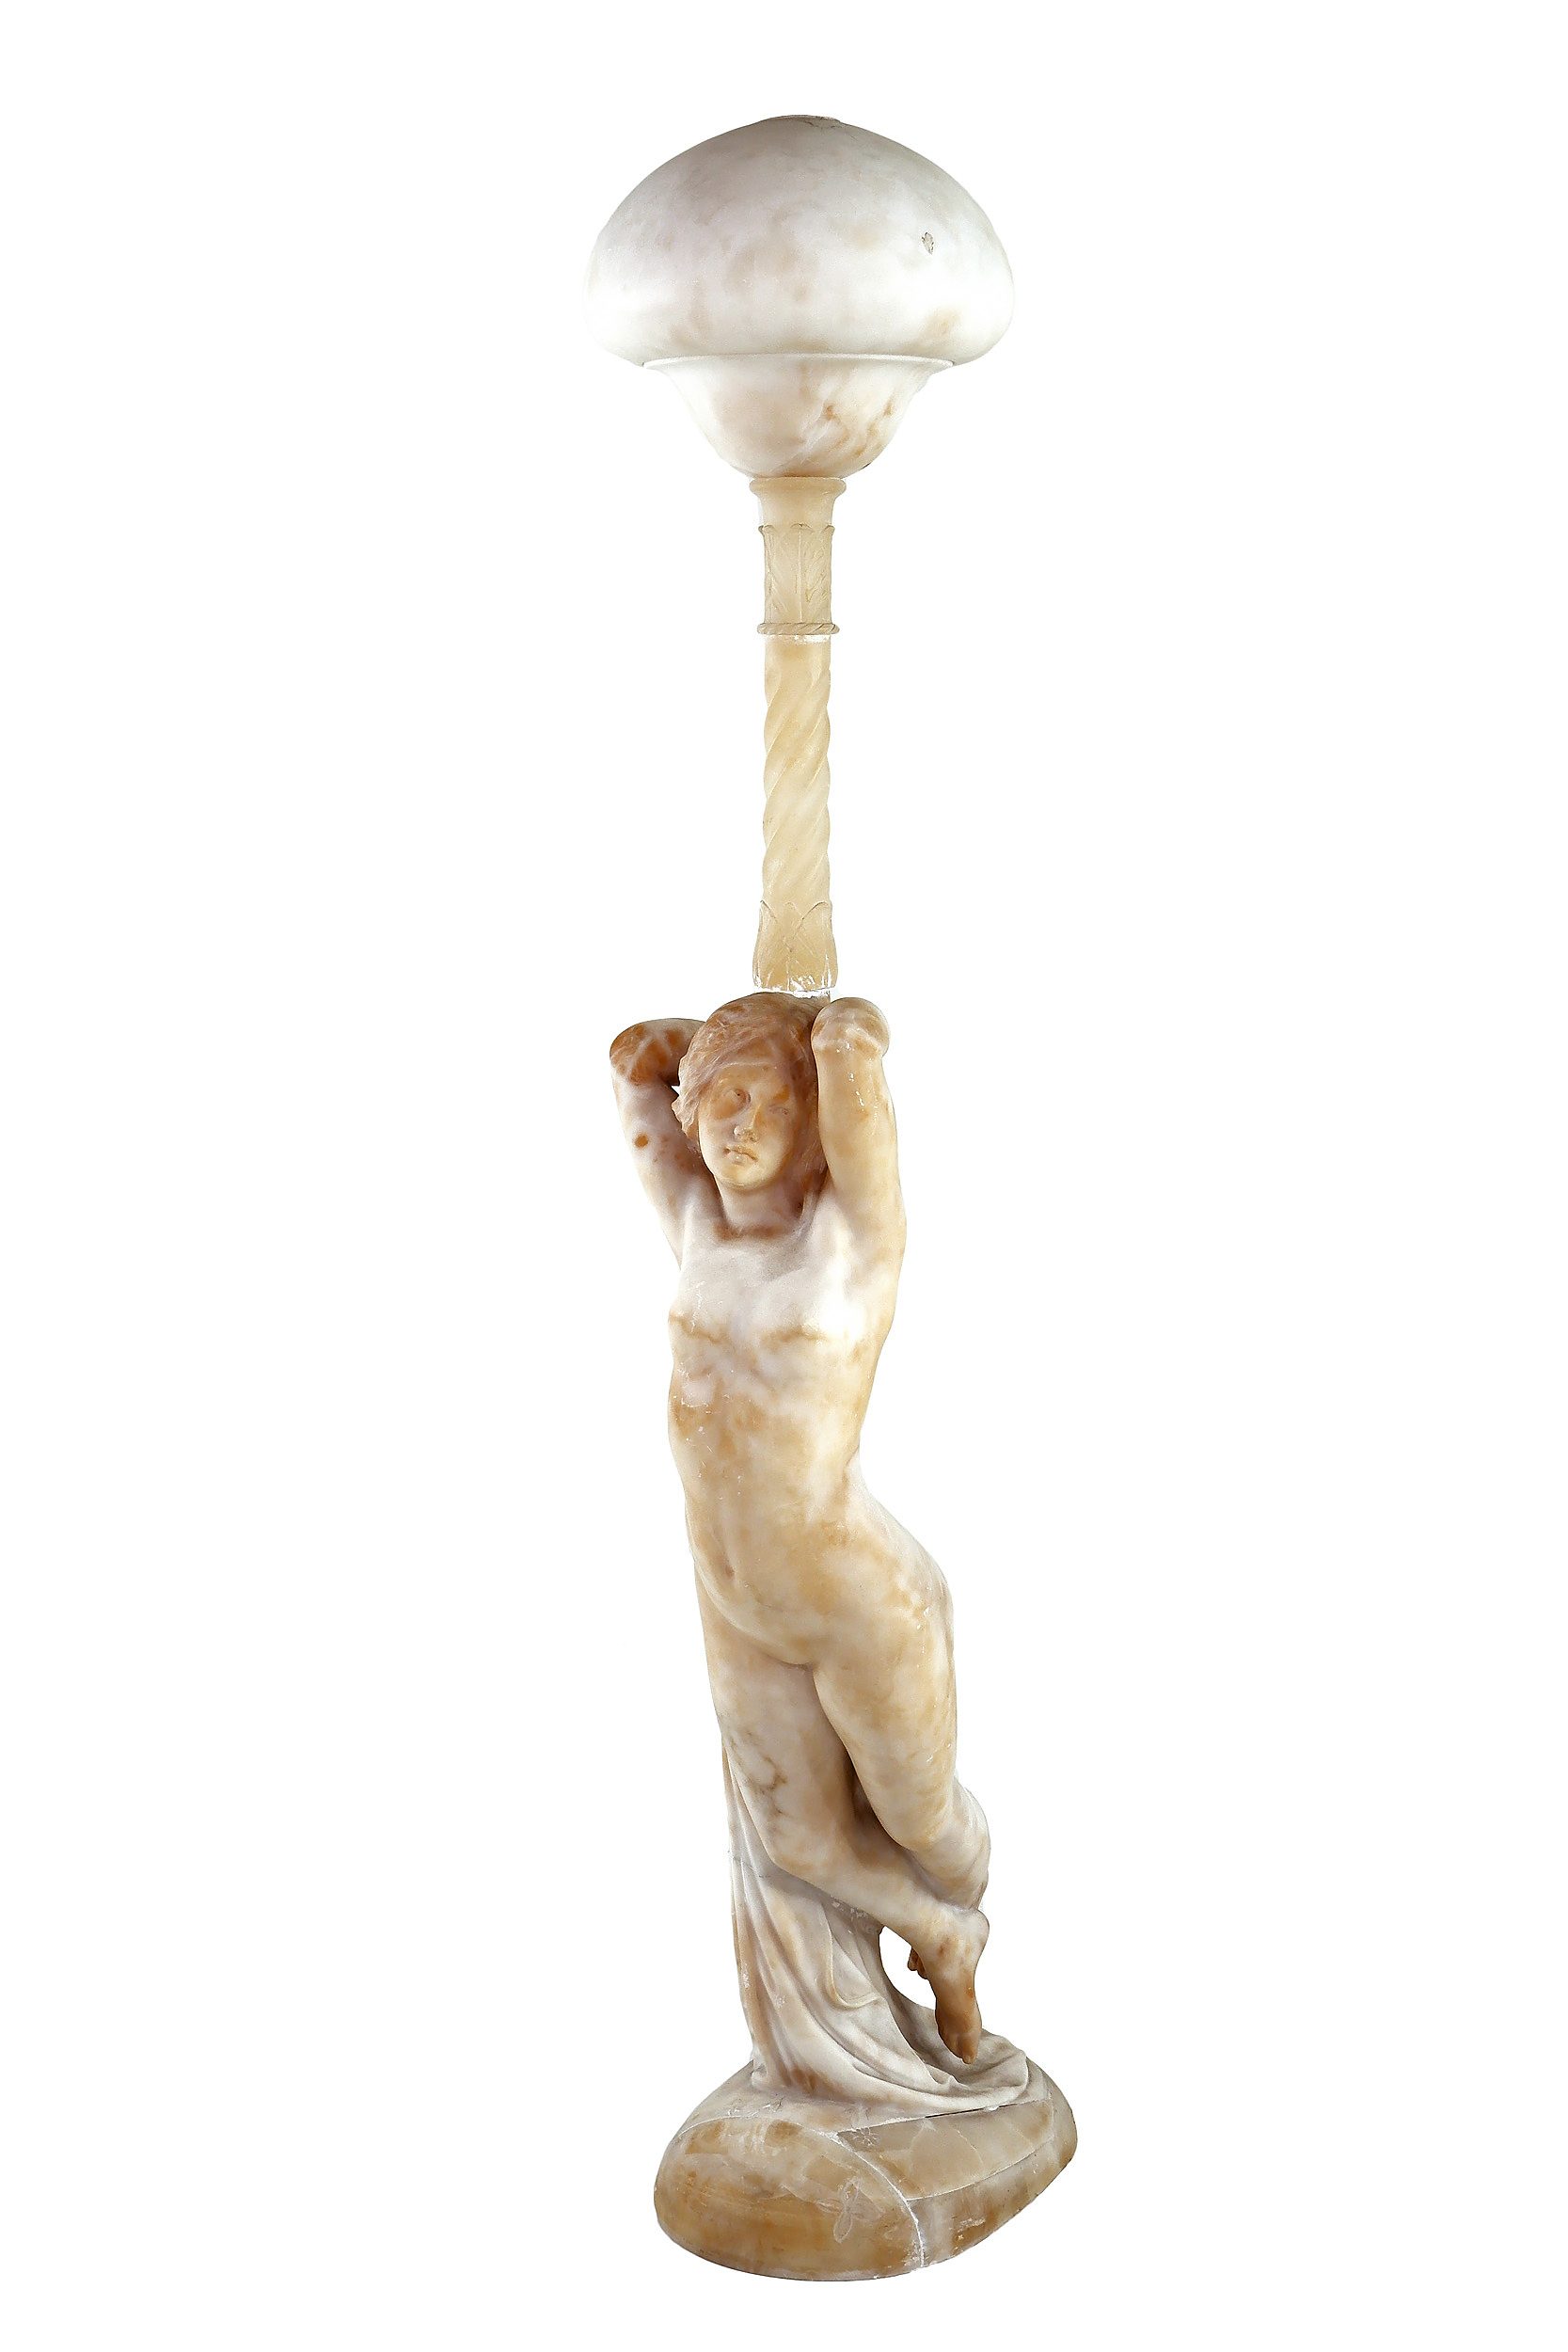 'Very Large Italian Alabaster Electric Lamp Carved as a Classical Maiden, Early 20th Century, Plus Associated Pedestal'